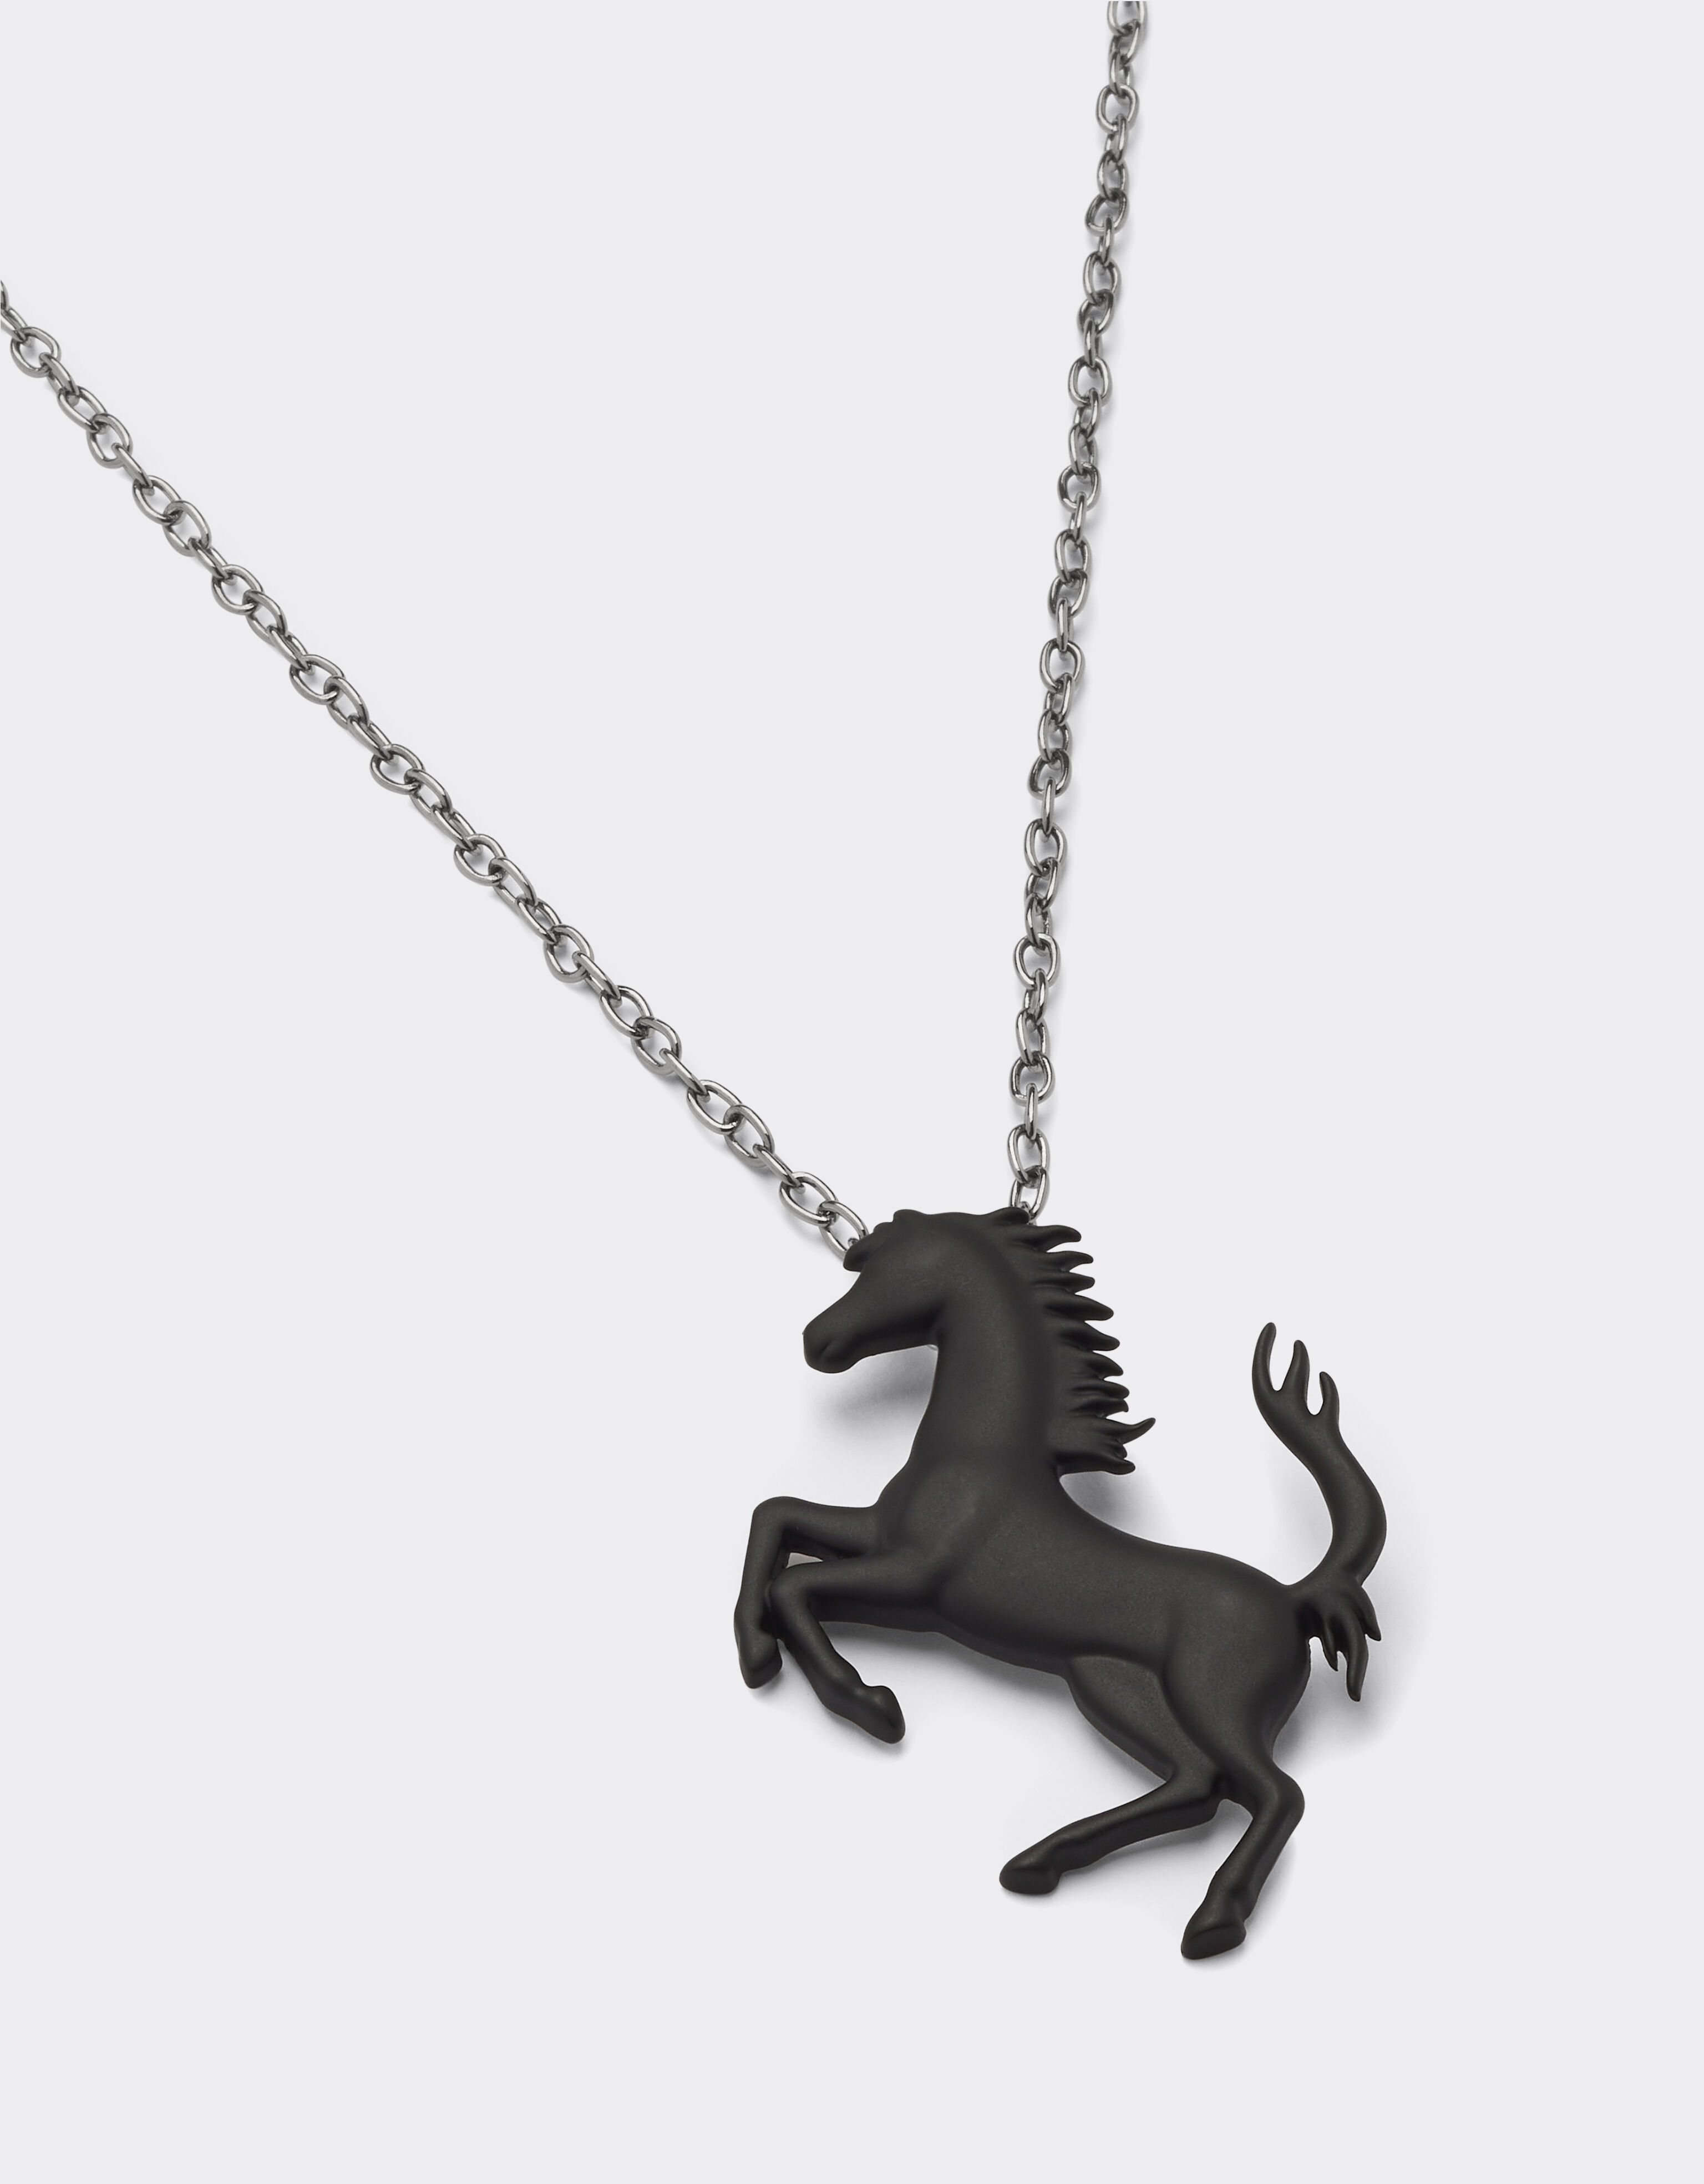 Ferrari Necklace with Prancing Horse Black 20010f